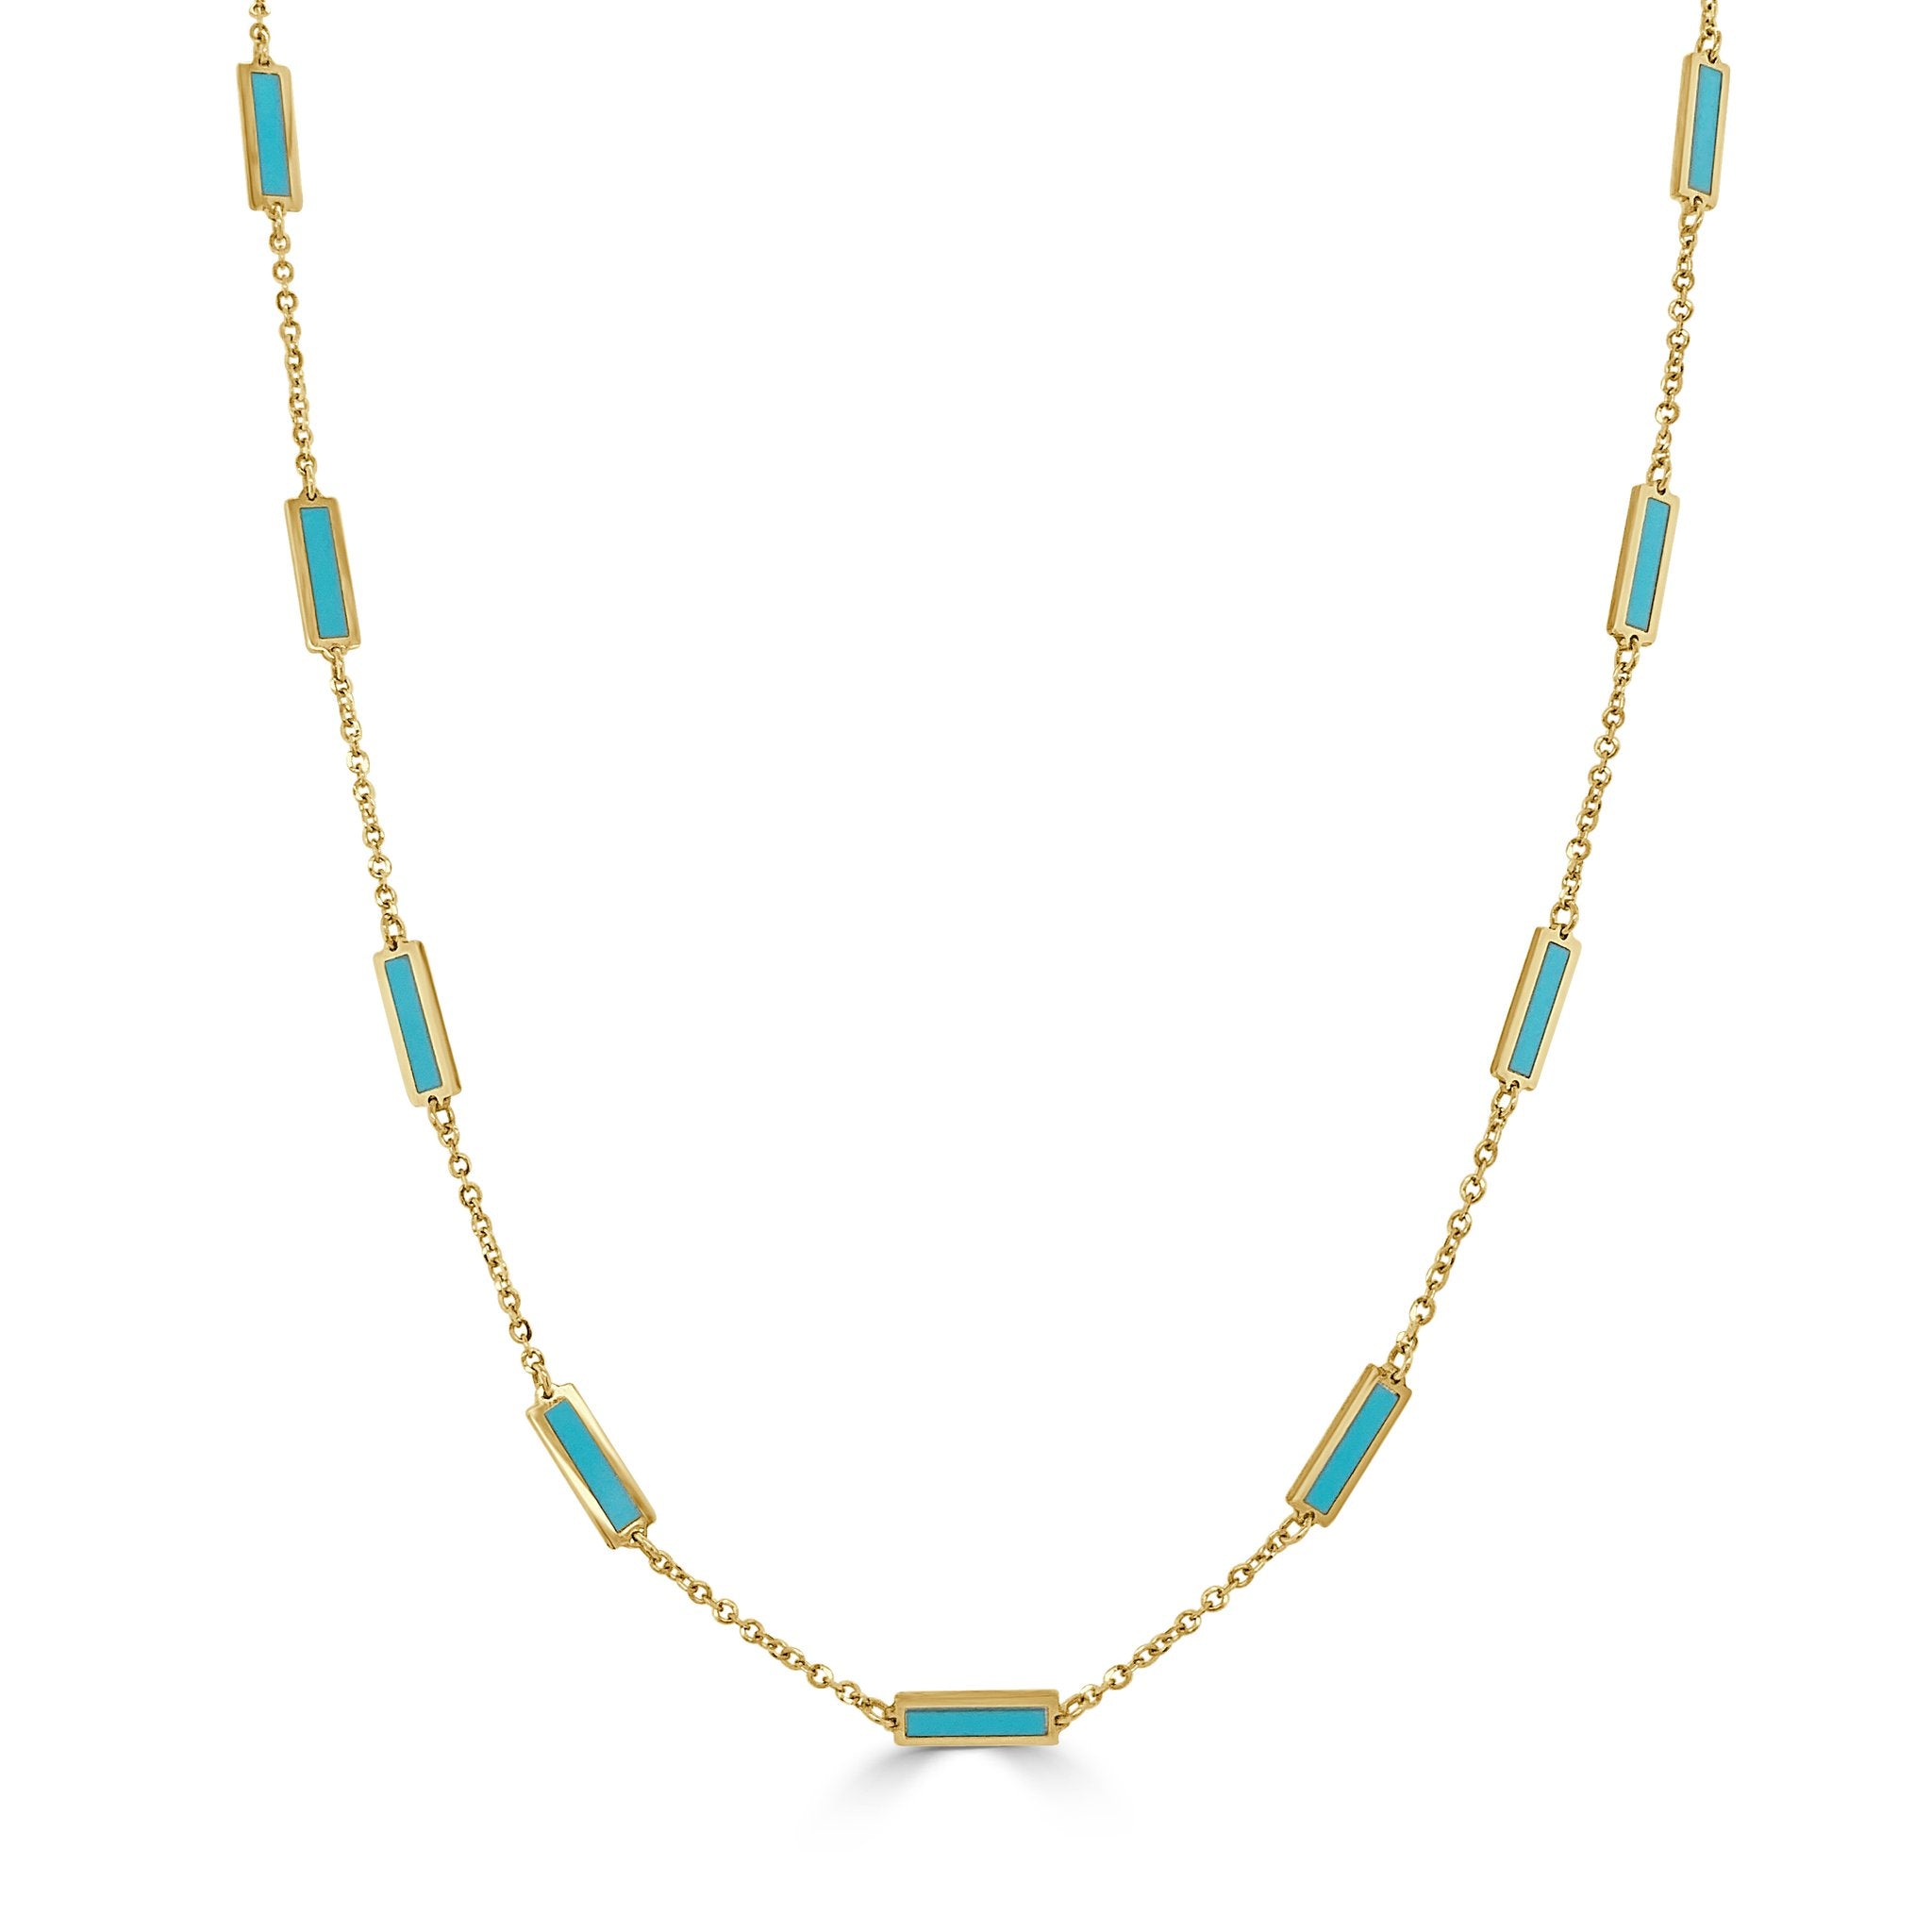 Turquoise Station Bar Necklace, 18"